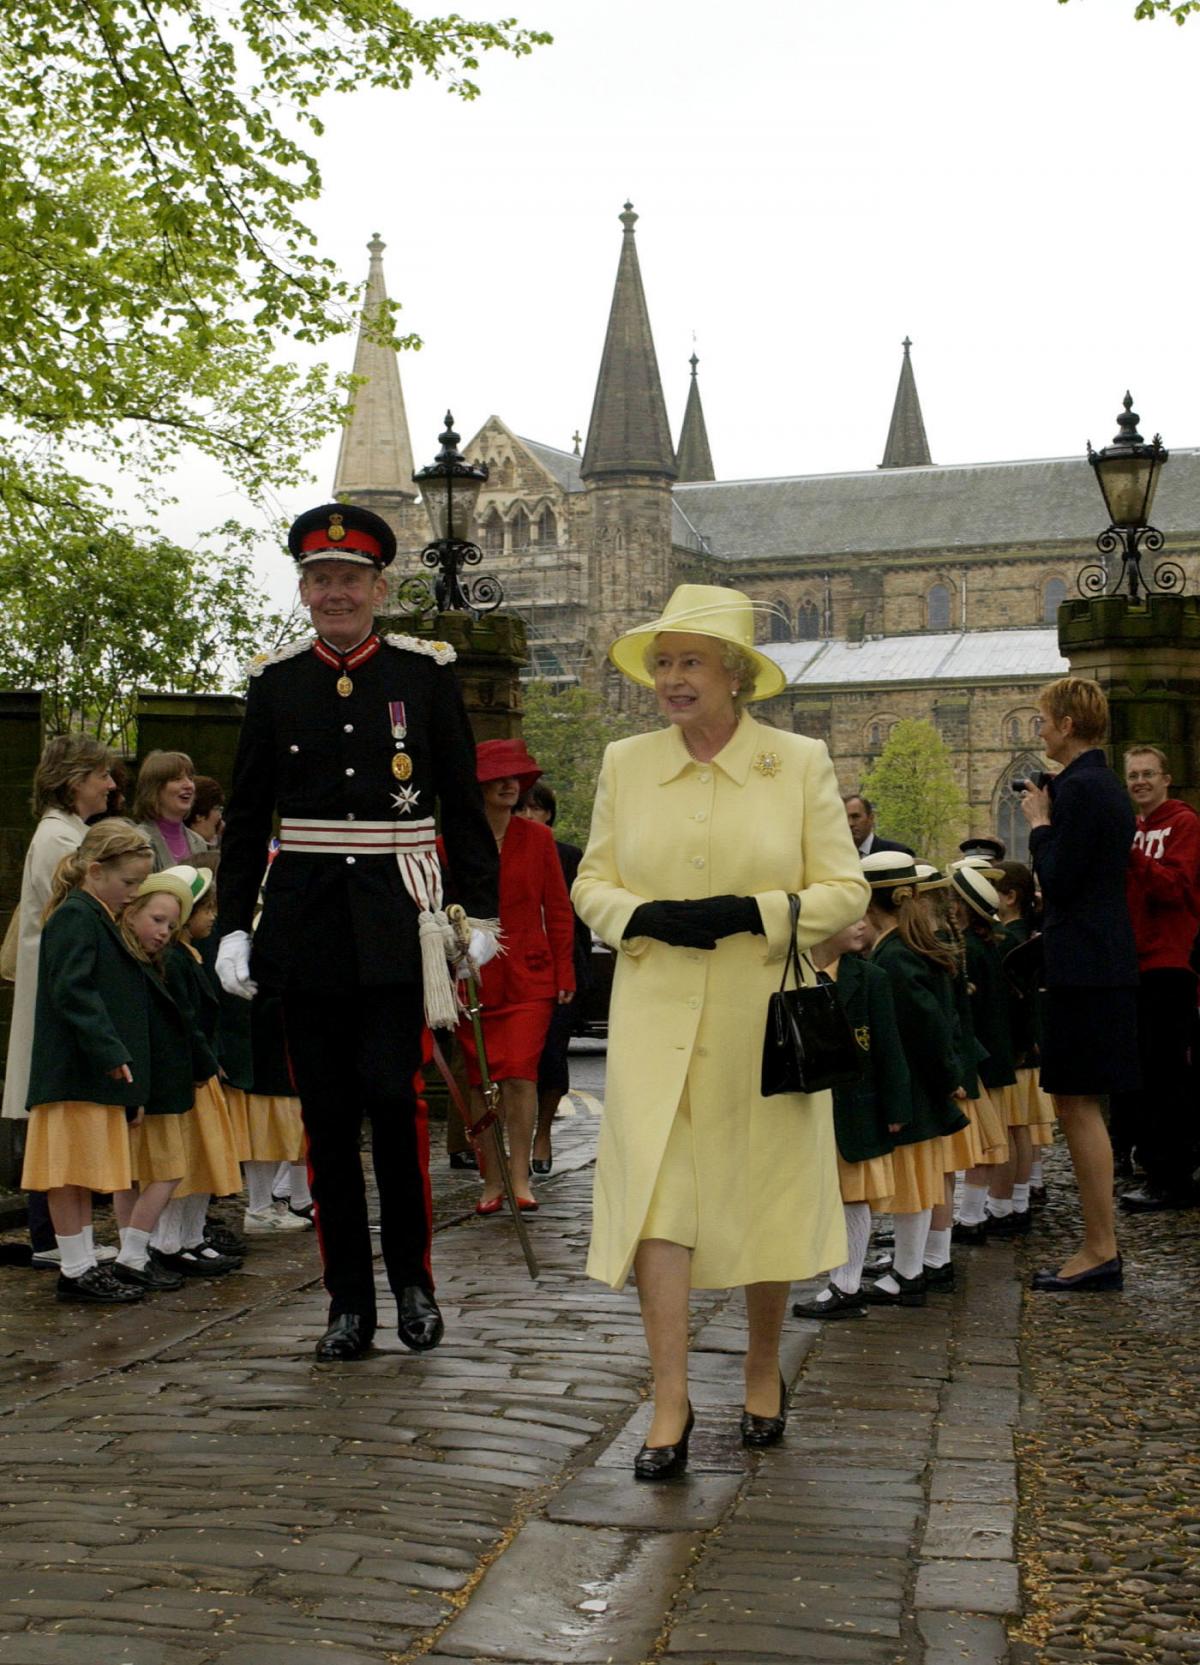 Queen Elizabeth II arrives at Durham Castle, County Durham, accompanied by the Lord Lieutenant of County Durham, Sir Paul Nicholson, on Wednesday 8 May, 2002